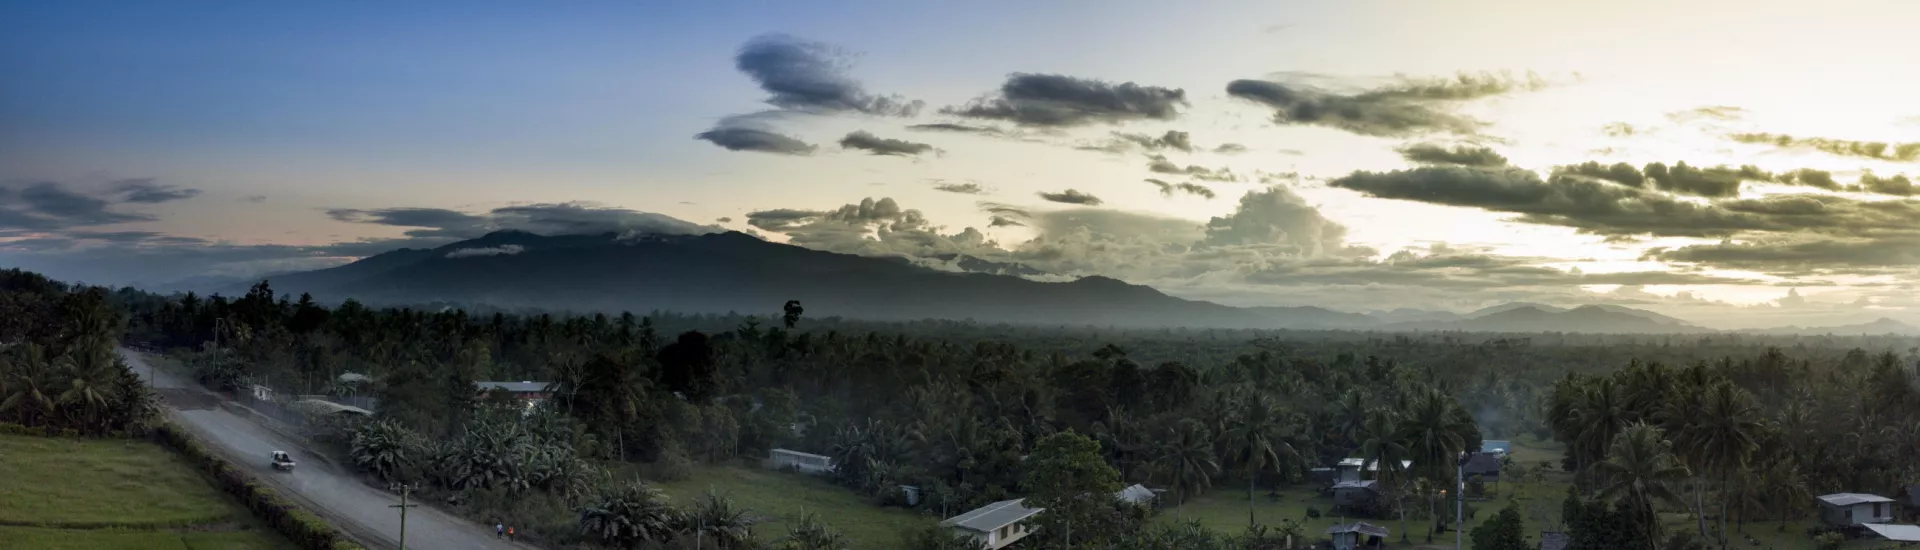 Panoramic shot of buildings near palm tree forest in Papua New Guinea